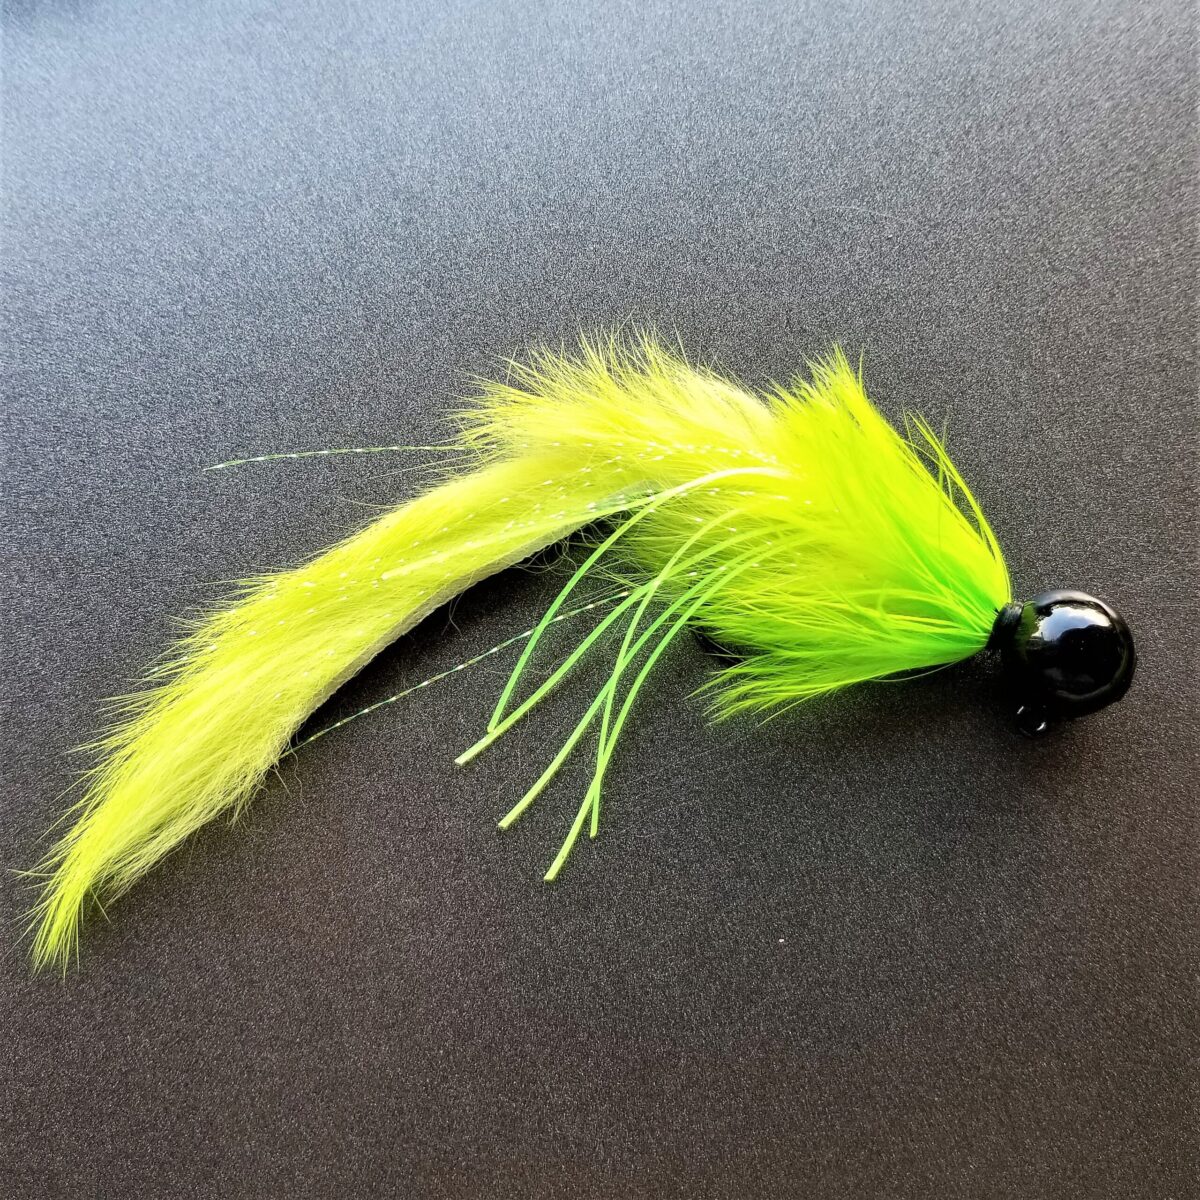 Dinger Jigs Twitching Jigs Irritant scaled 1200x1200 - Twitching Jigs